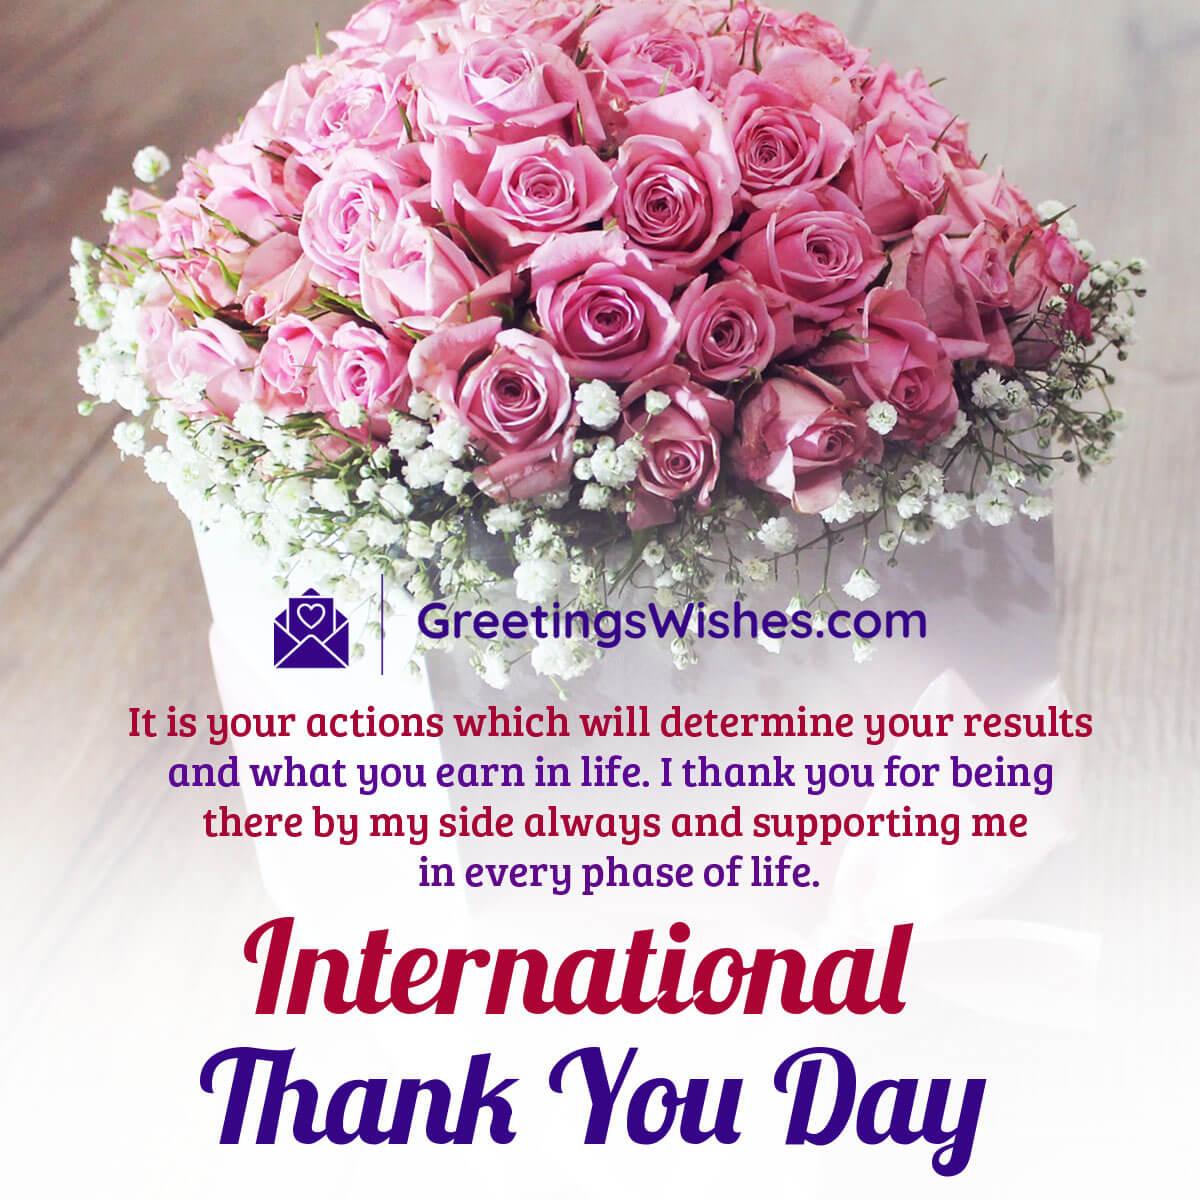 Thank You Day Greetings